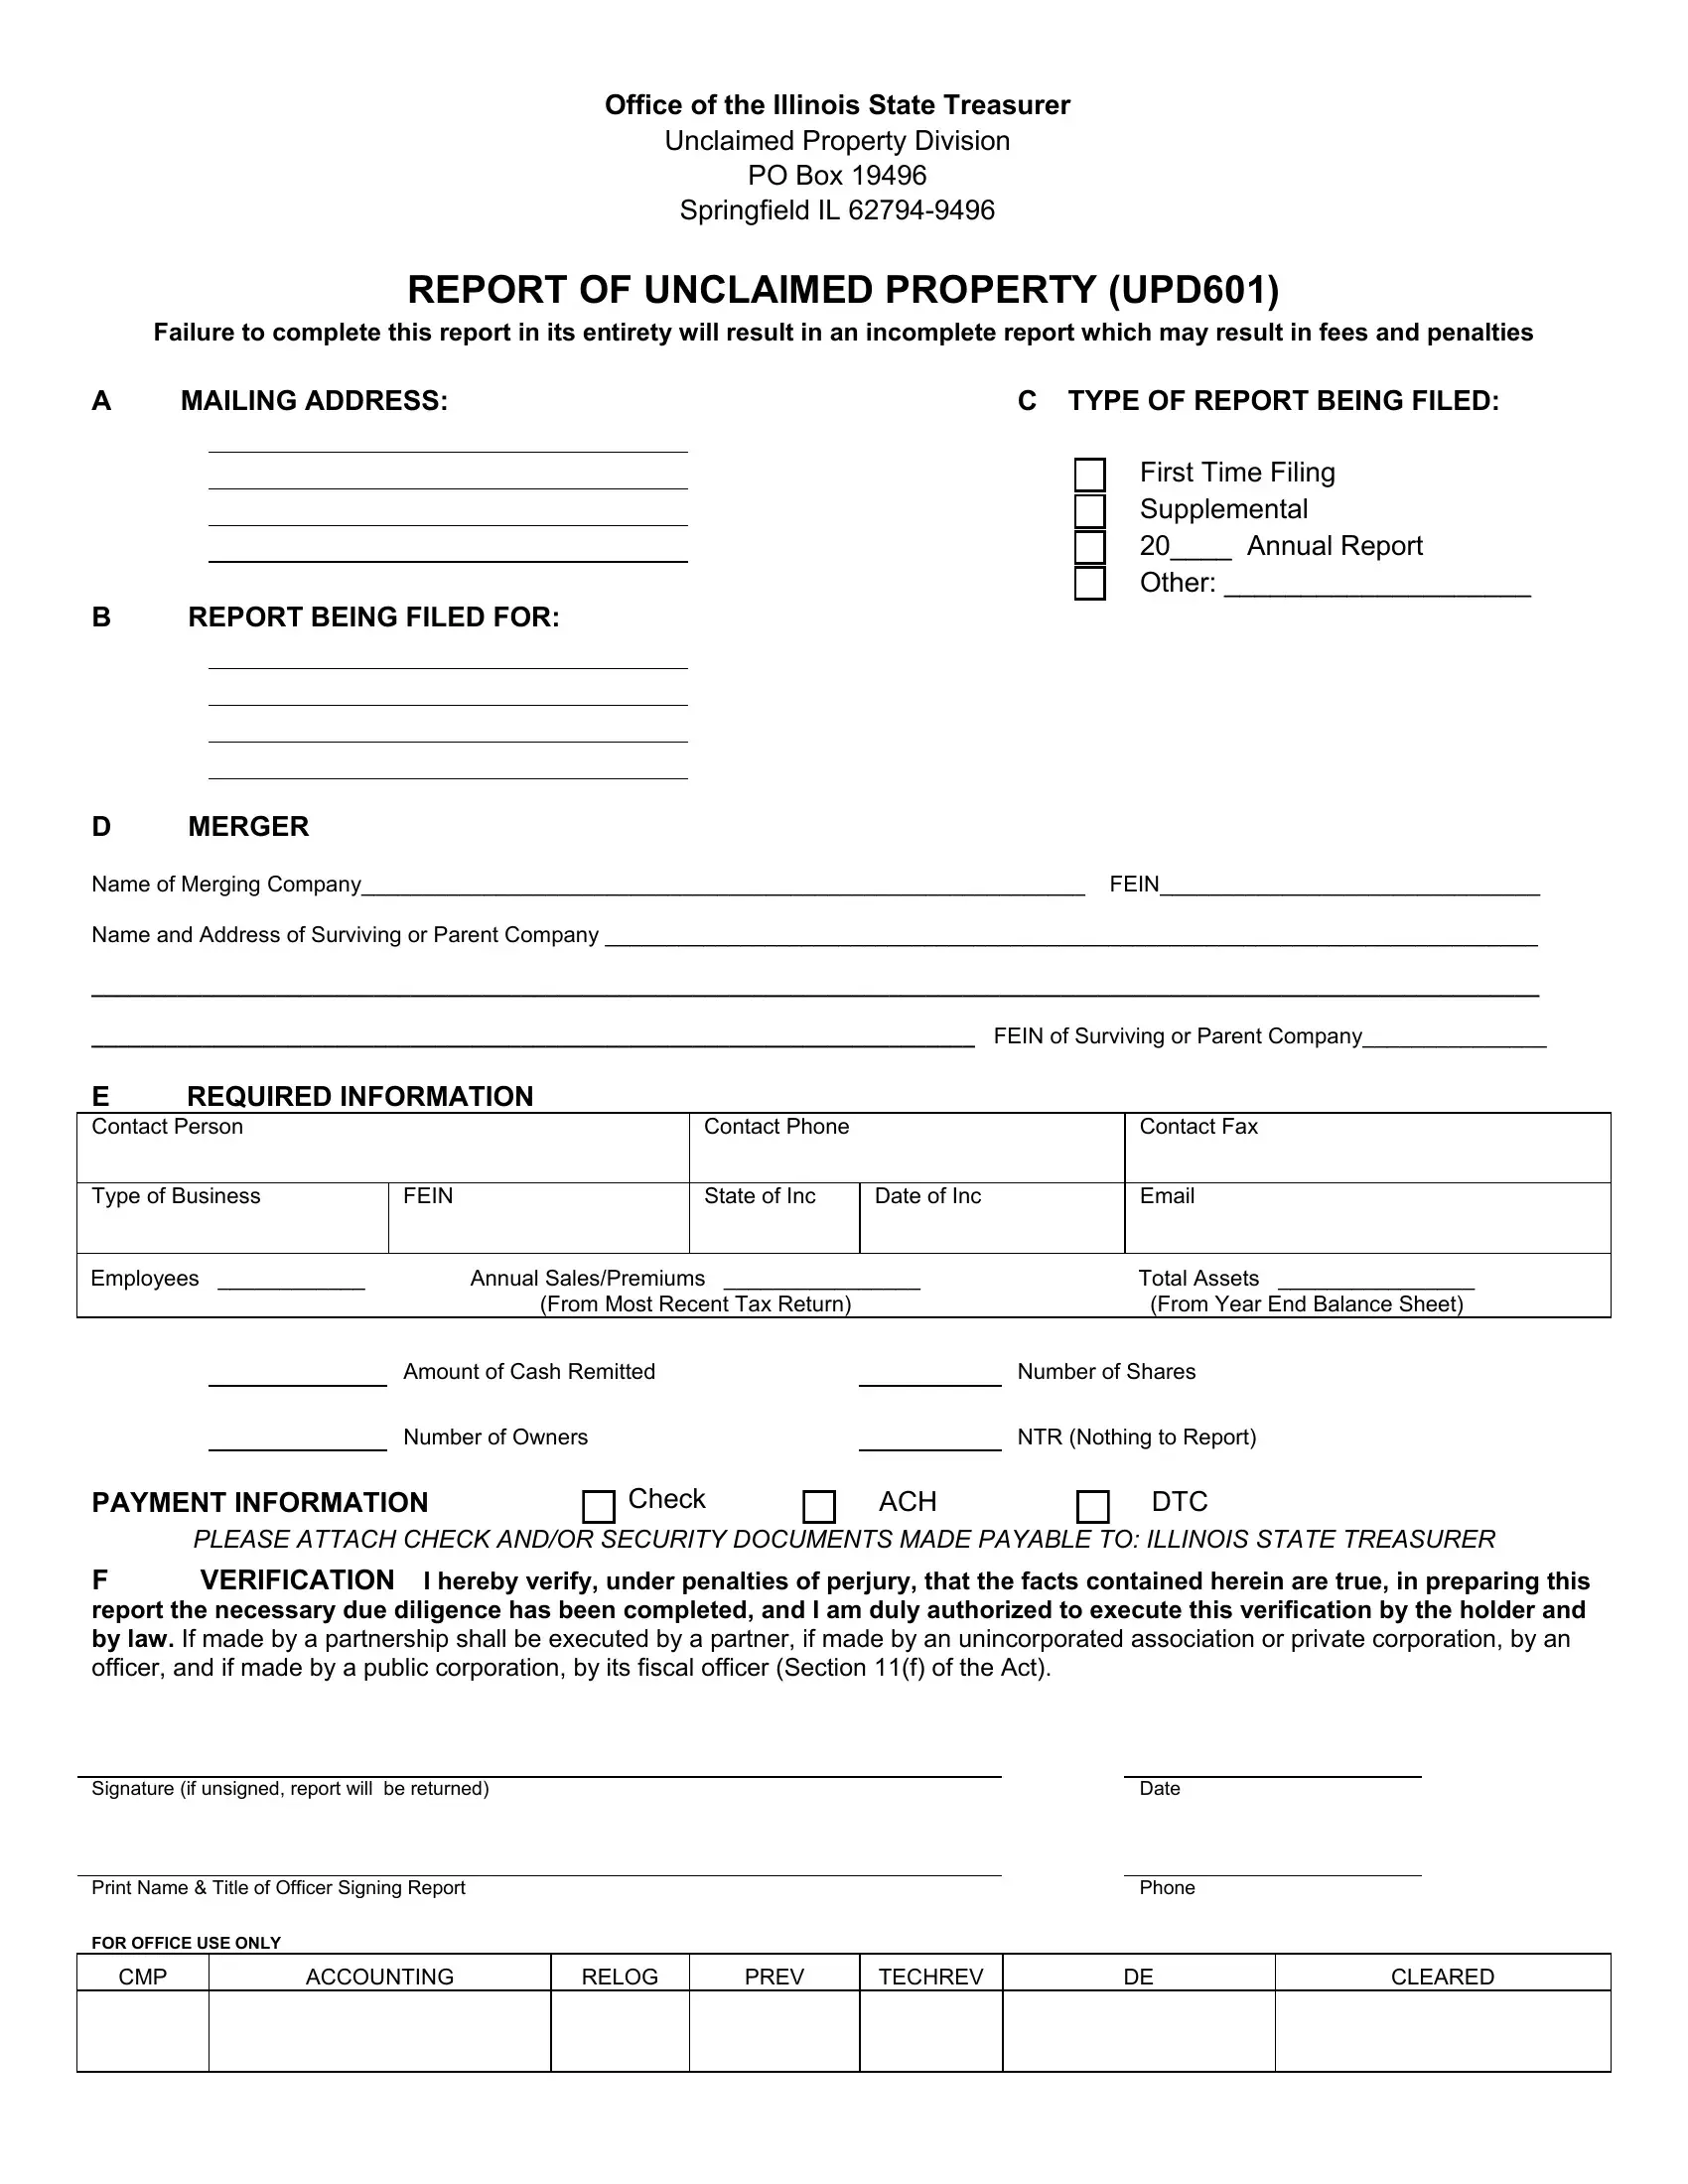 illinois-unclaimed-property-reporting-pdf-form-formspal